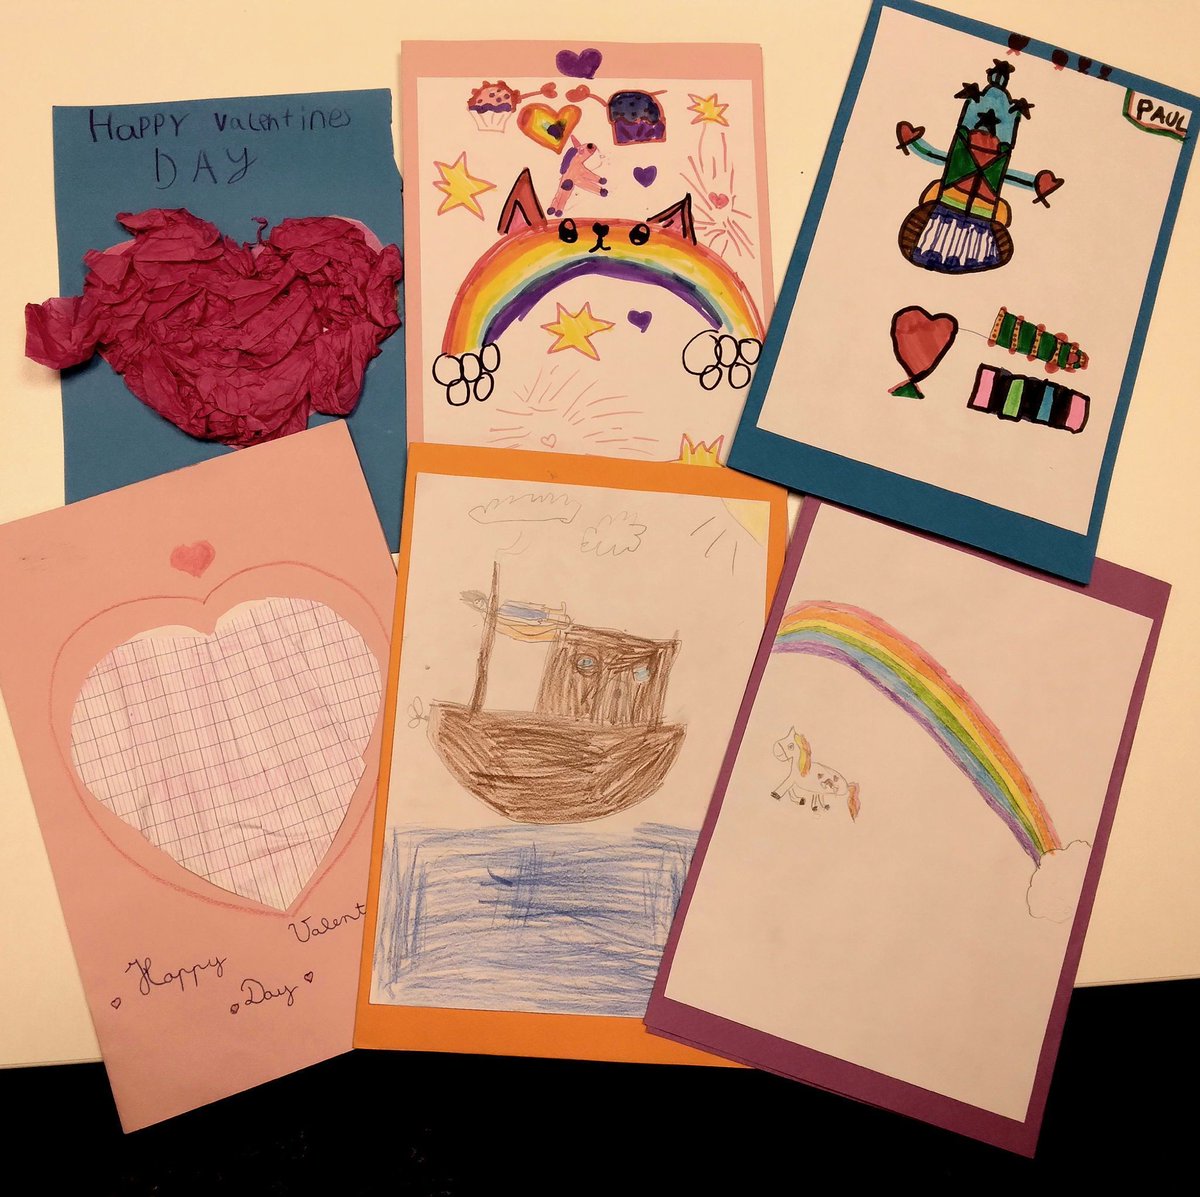 Thanks to the the local primary schools who made lovely #valentinesday cards for all the older people who attended our Gala Concert on the 9th Feb. Everybody loved them! ❤️ #LePetiteEcoleFrancaise @stlukes_primary @Knightsbridge06 #WetherbyKensingtonSchool @ashprimary #Community